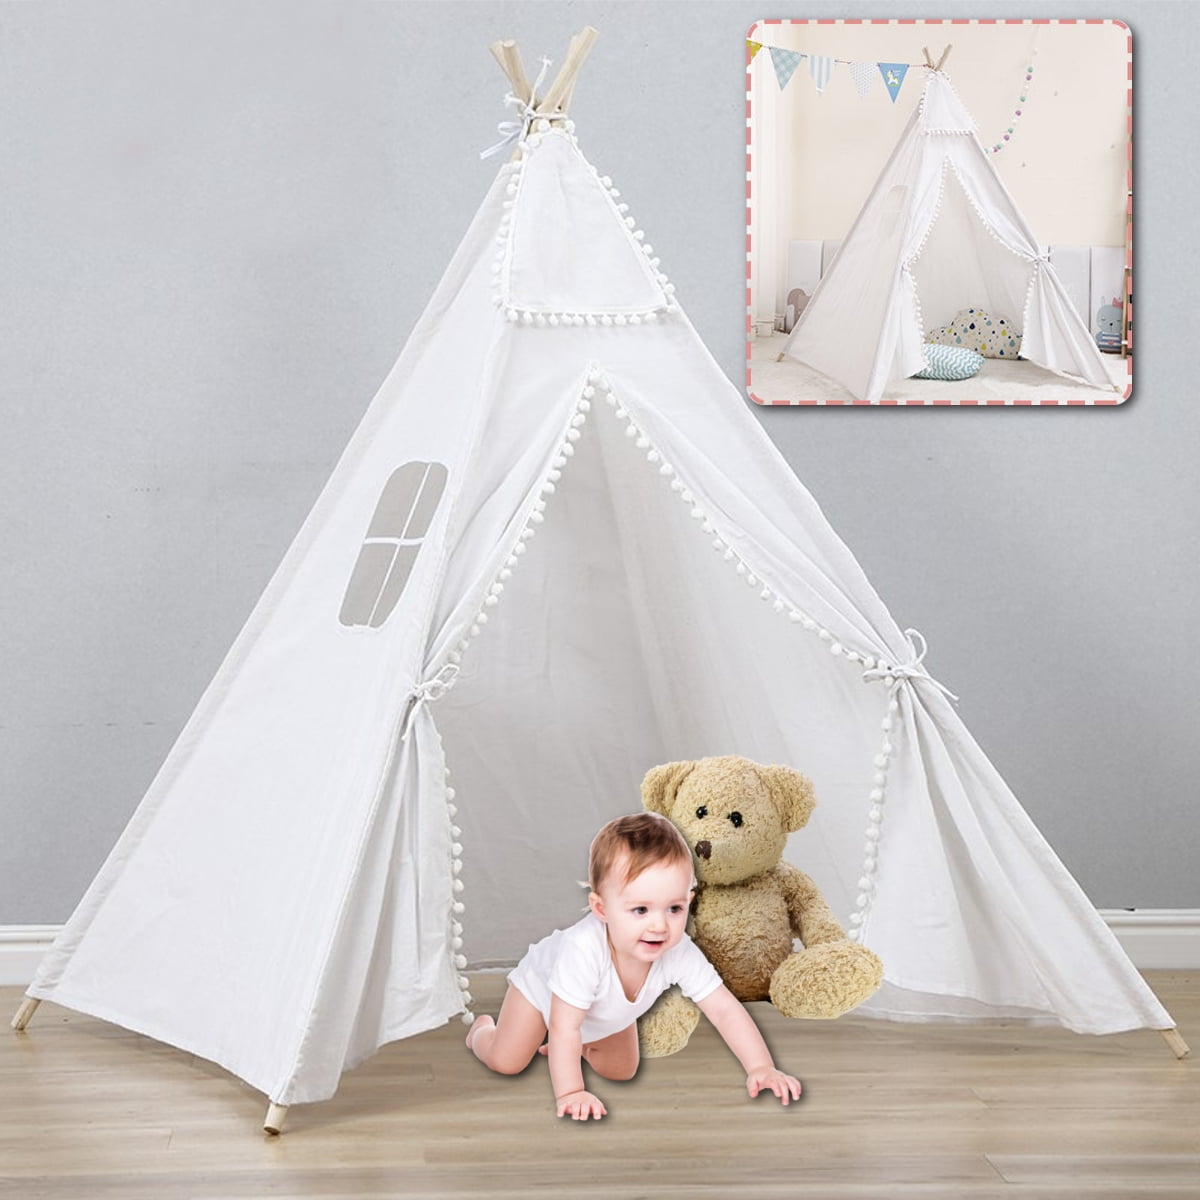 Indoor & Outdoor Tent Playhouse for Boys Girls & Details about   Space World Kids Play Tent 